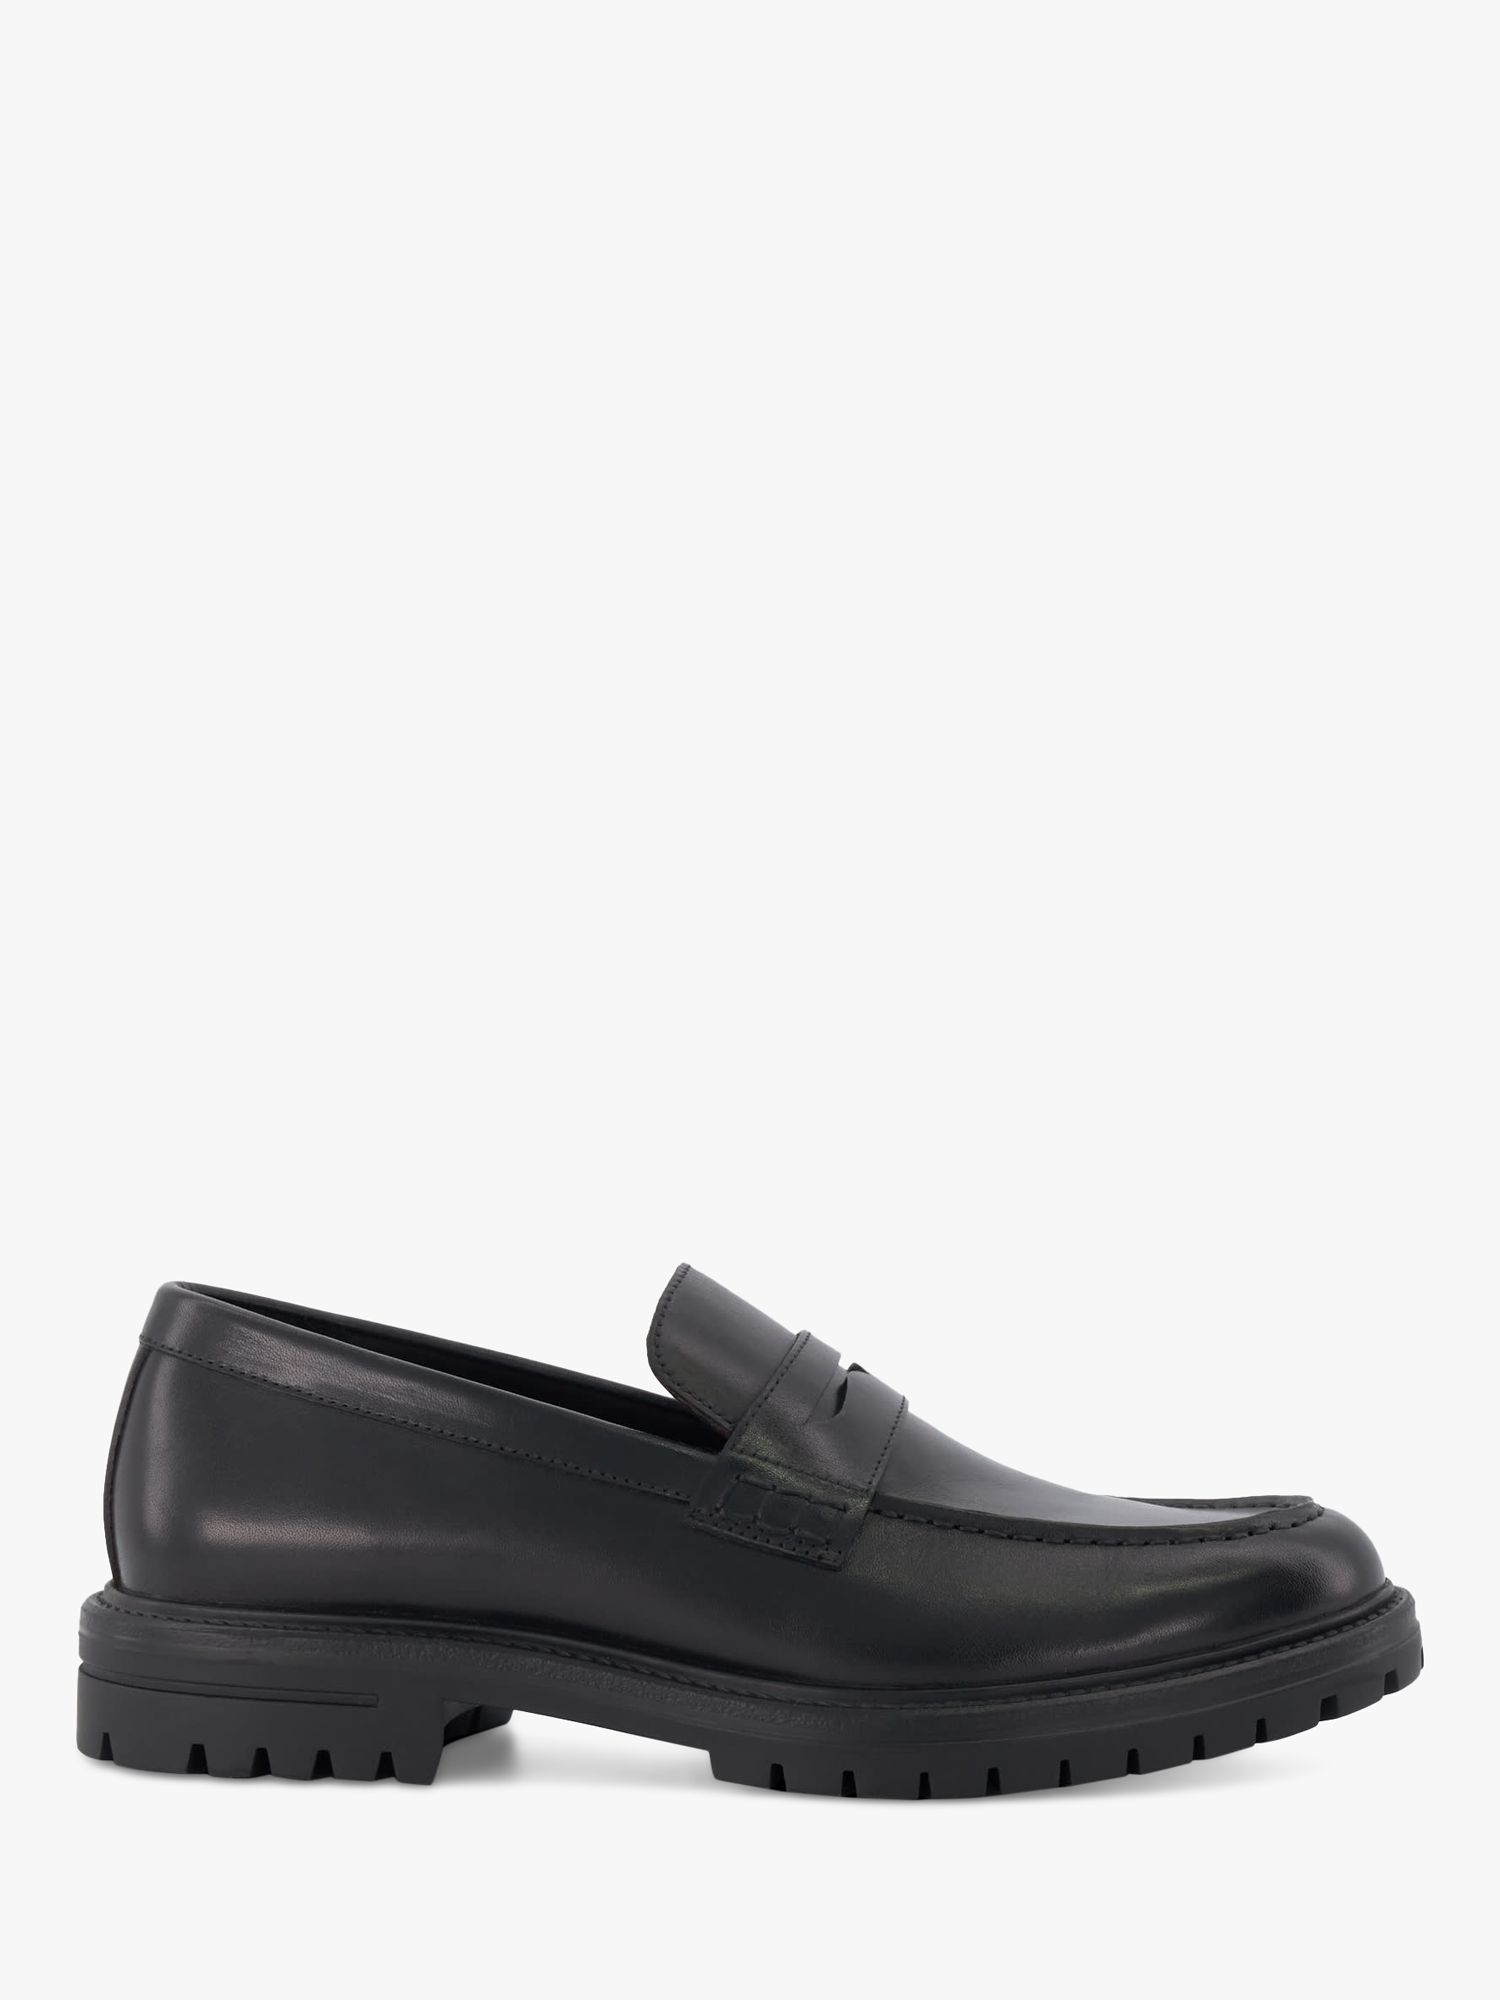 Dune Banking Cleated Sole Penny Loafers, Black-leather at John Lewis ...